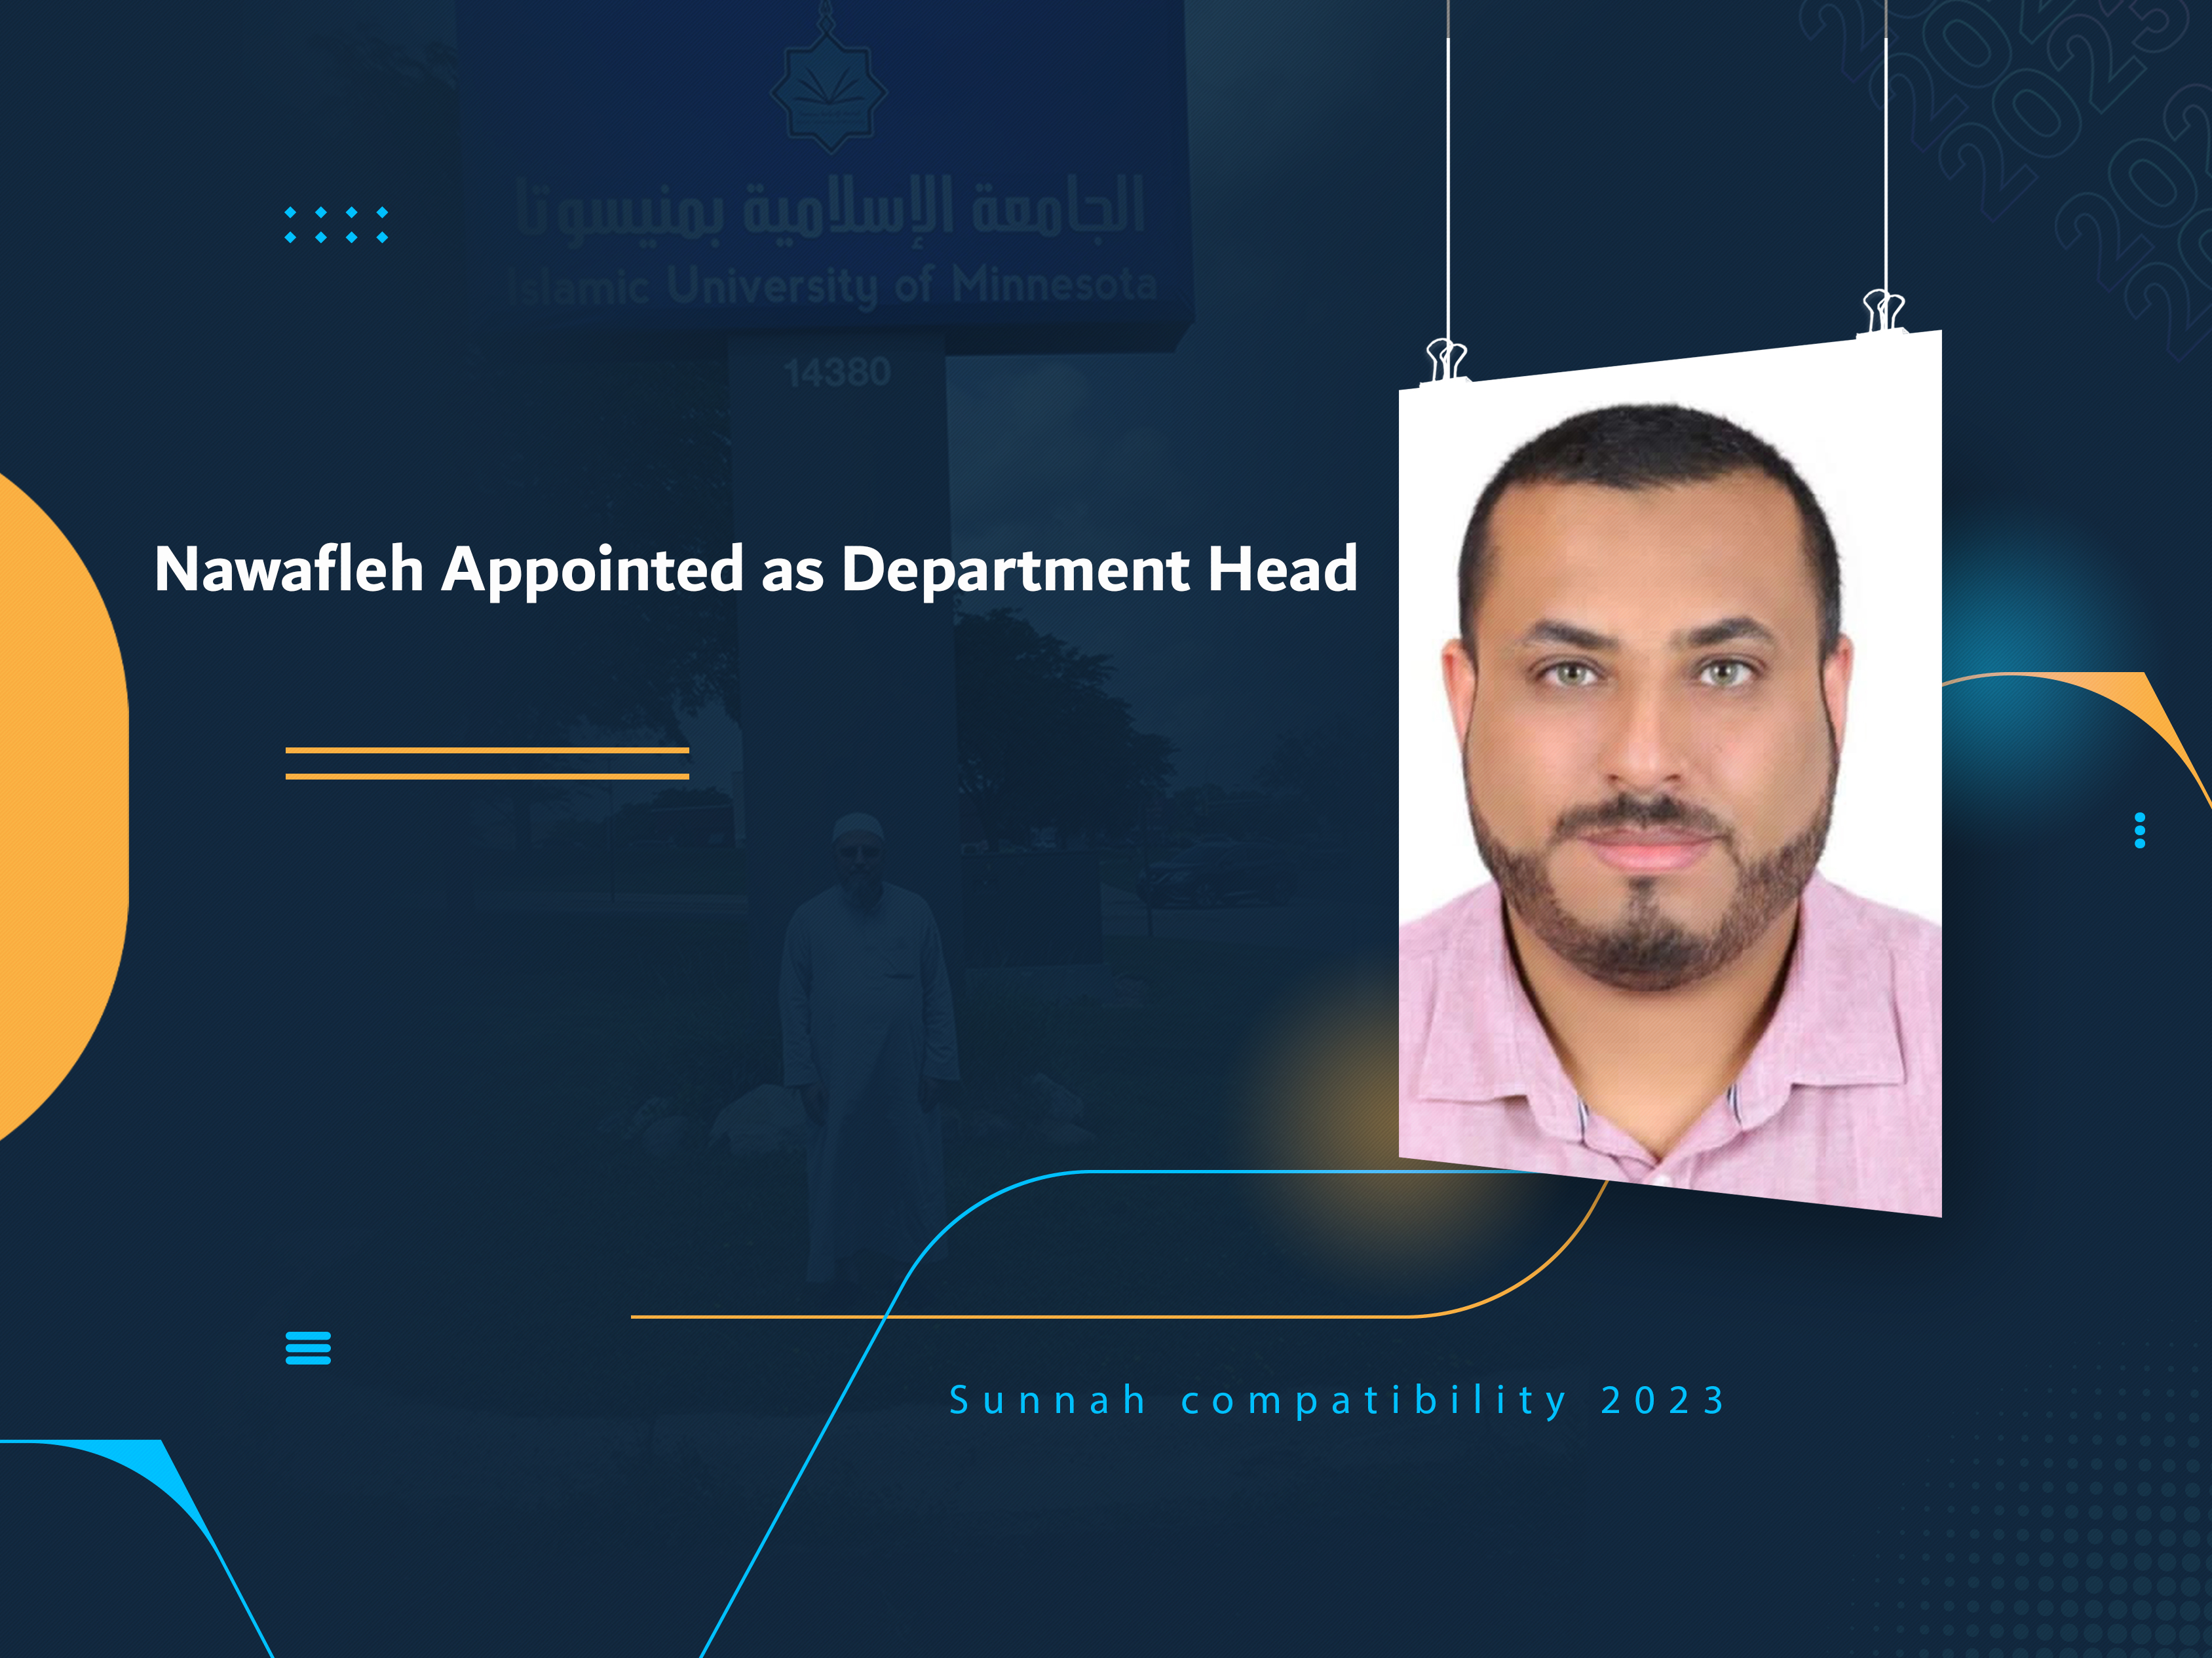 Nawafleh Appointed as Department Head